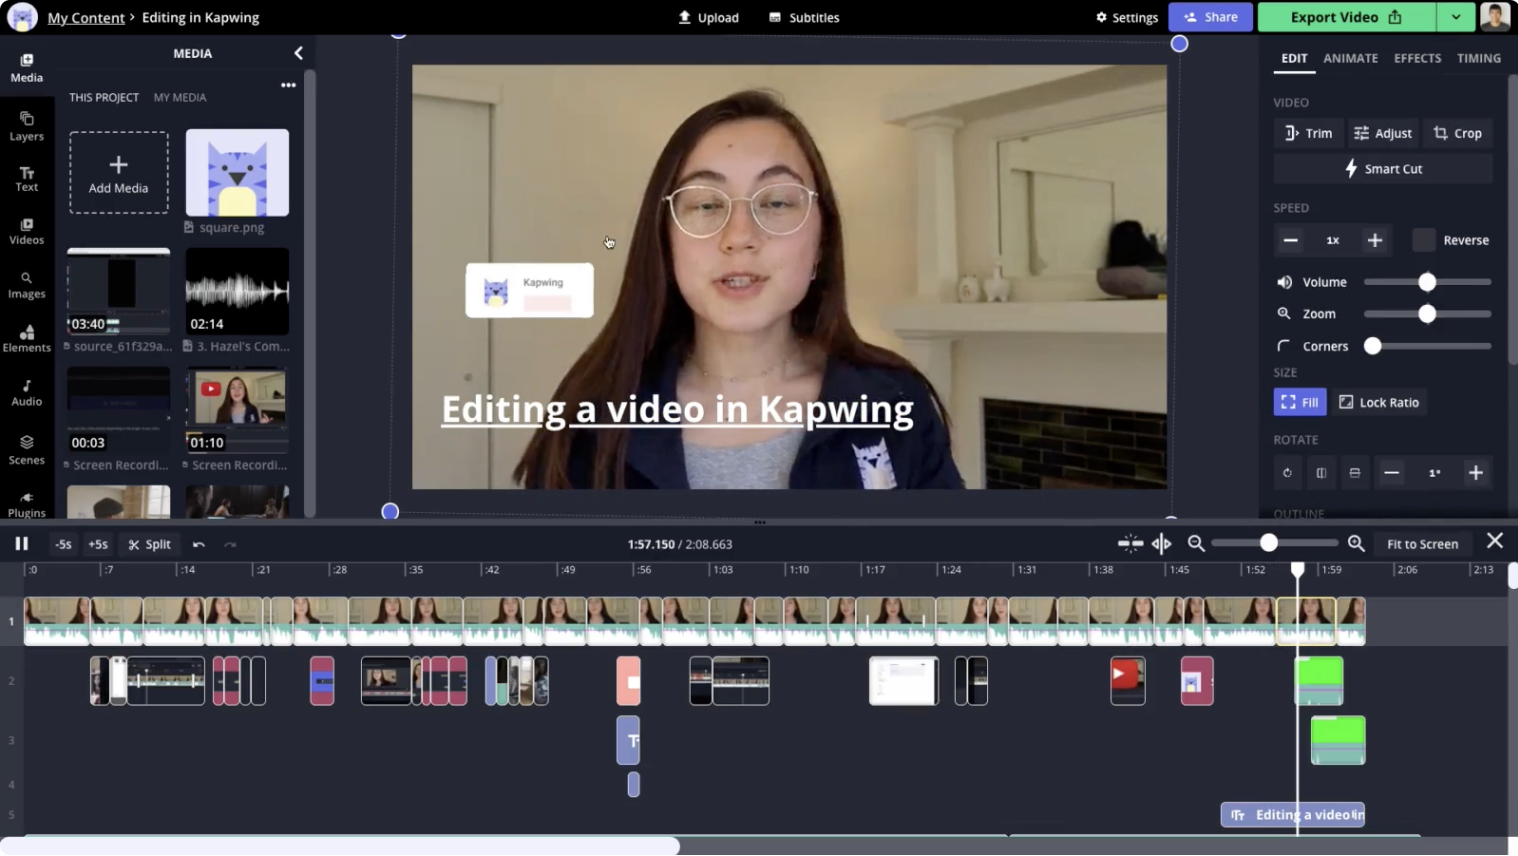 Editing video with Kapwing